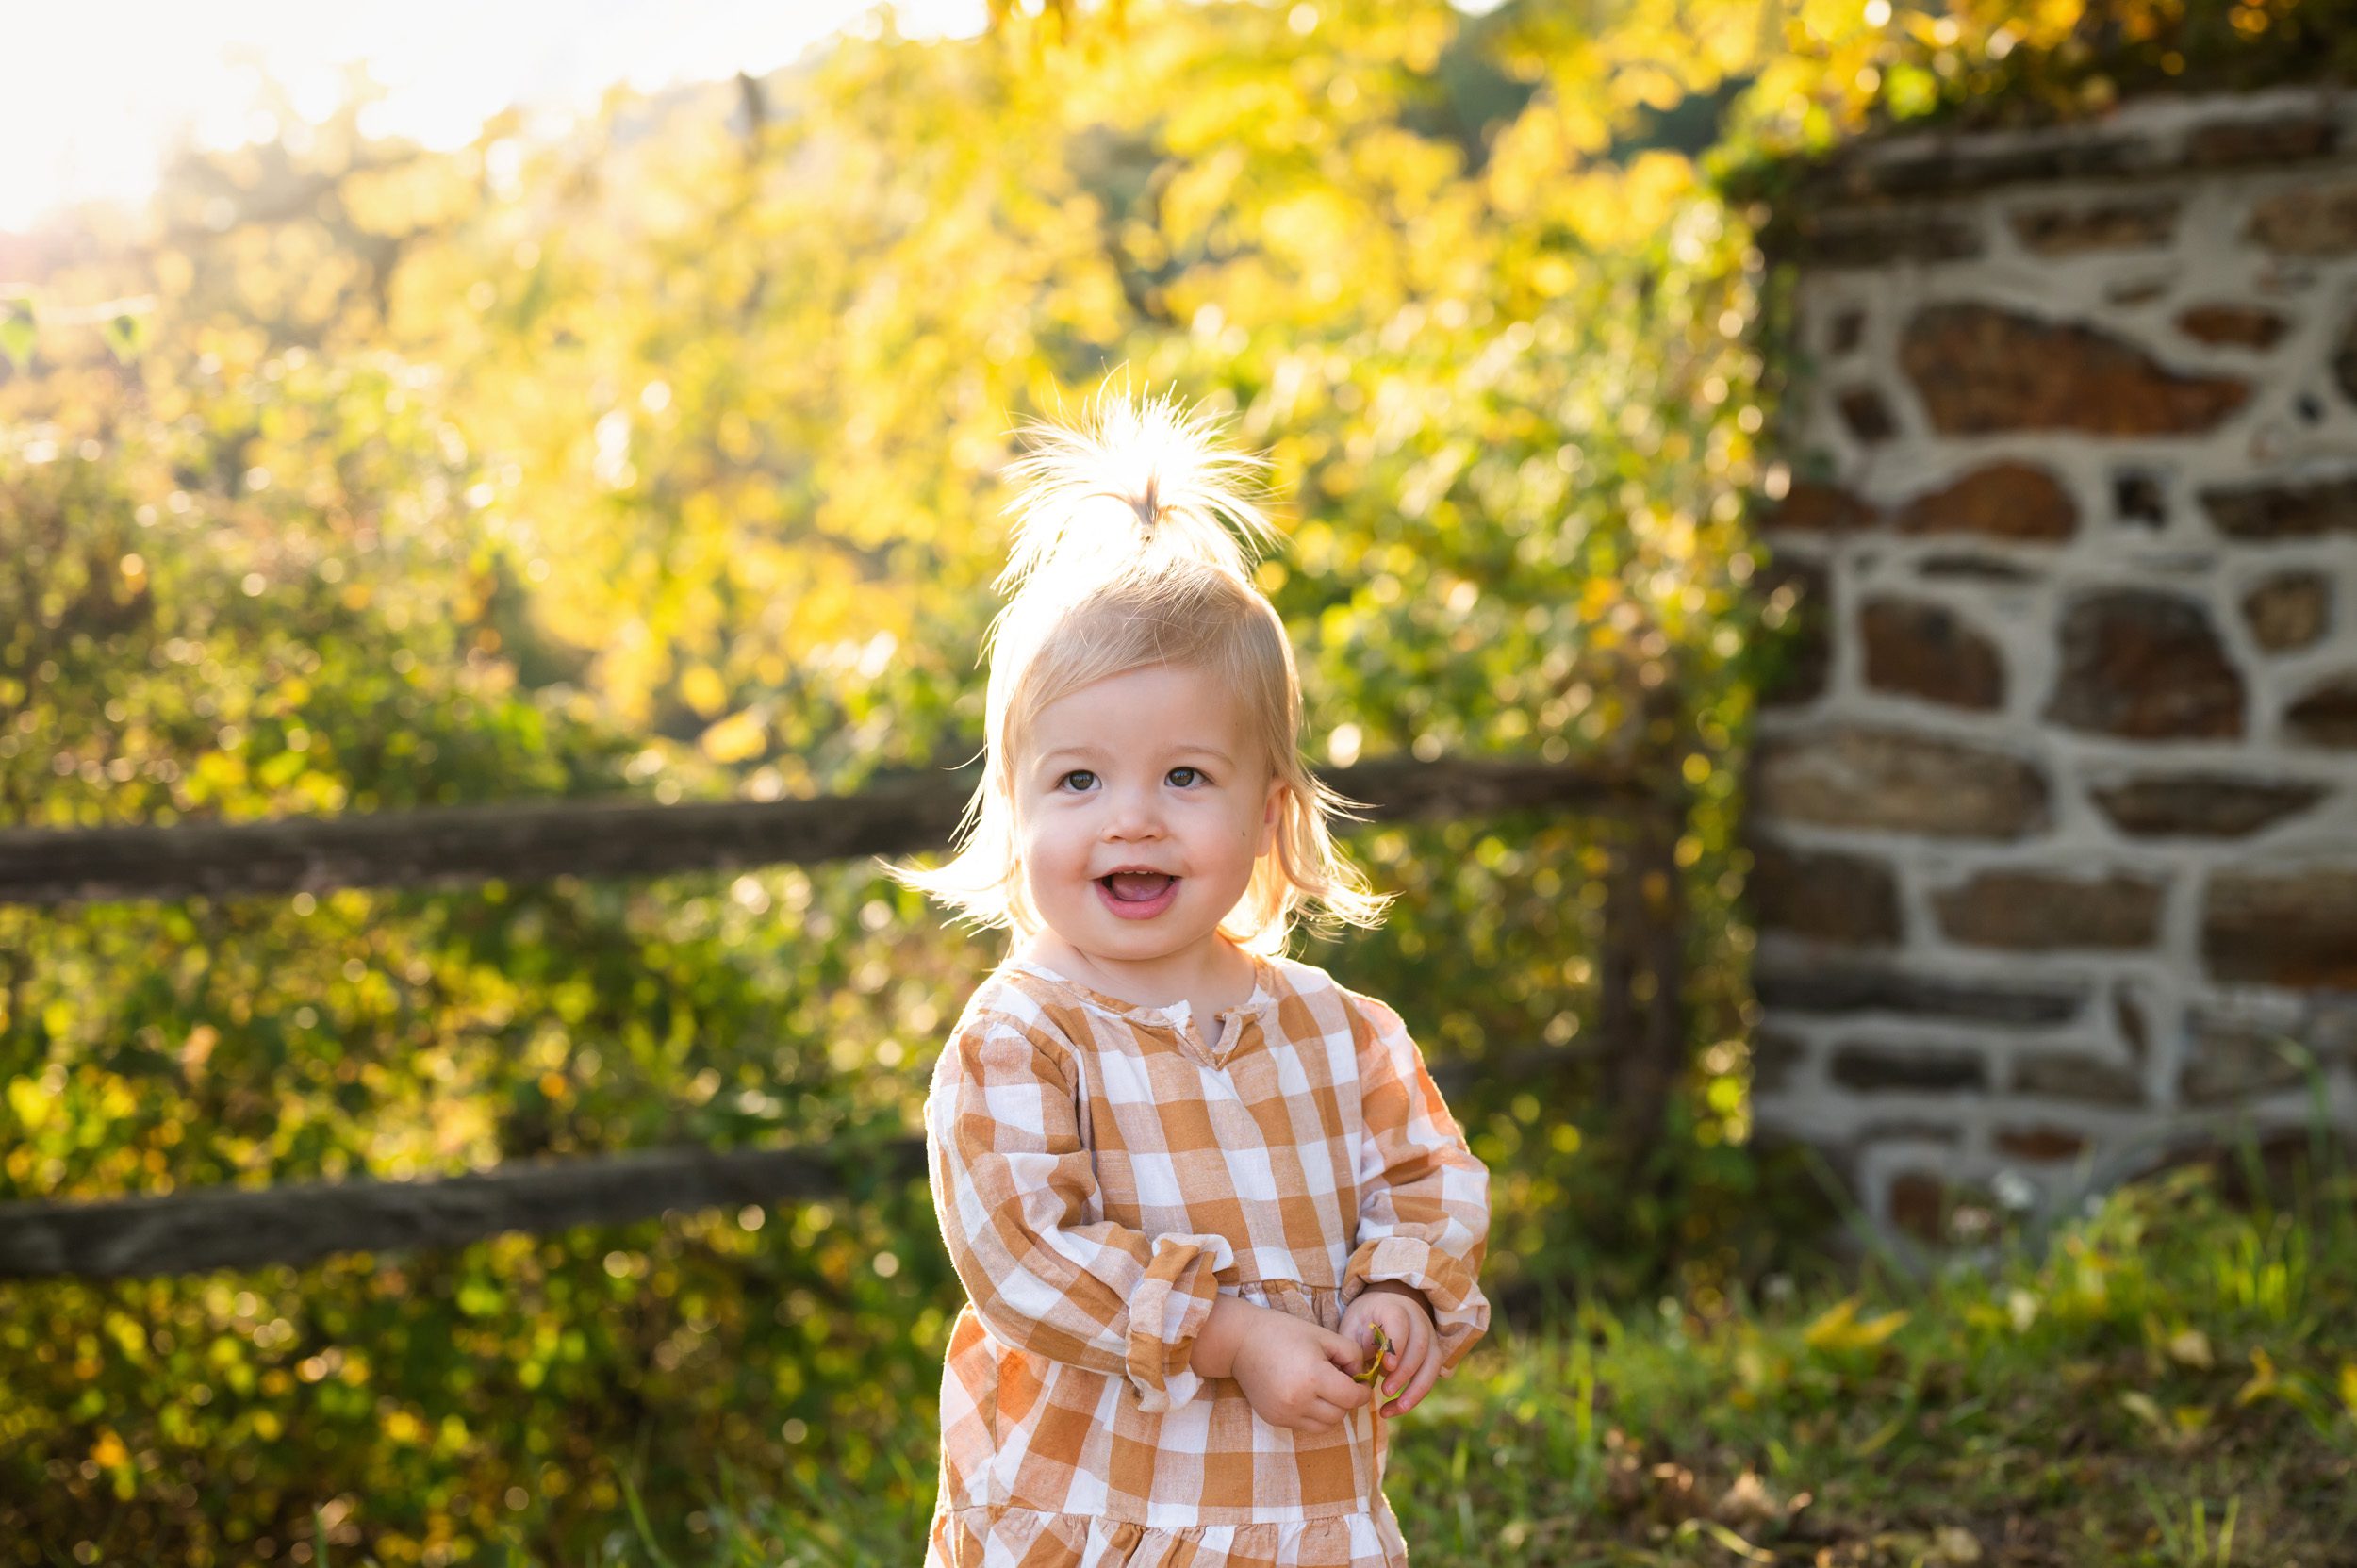 a young girl standing in front of a fence and smiling with the sunlight shining through the colorful fall leaves and lighting up her ponytail during a maternity photoshoot